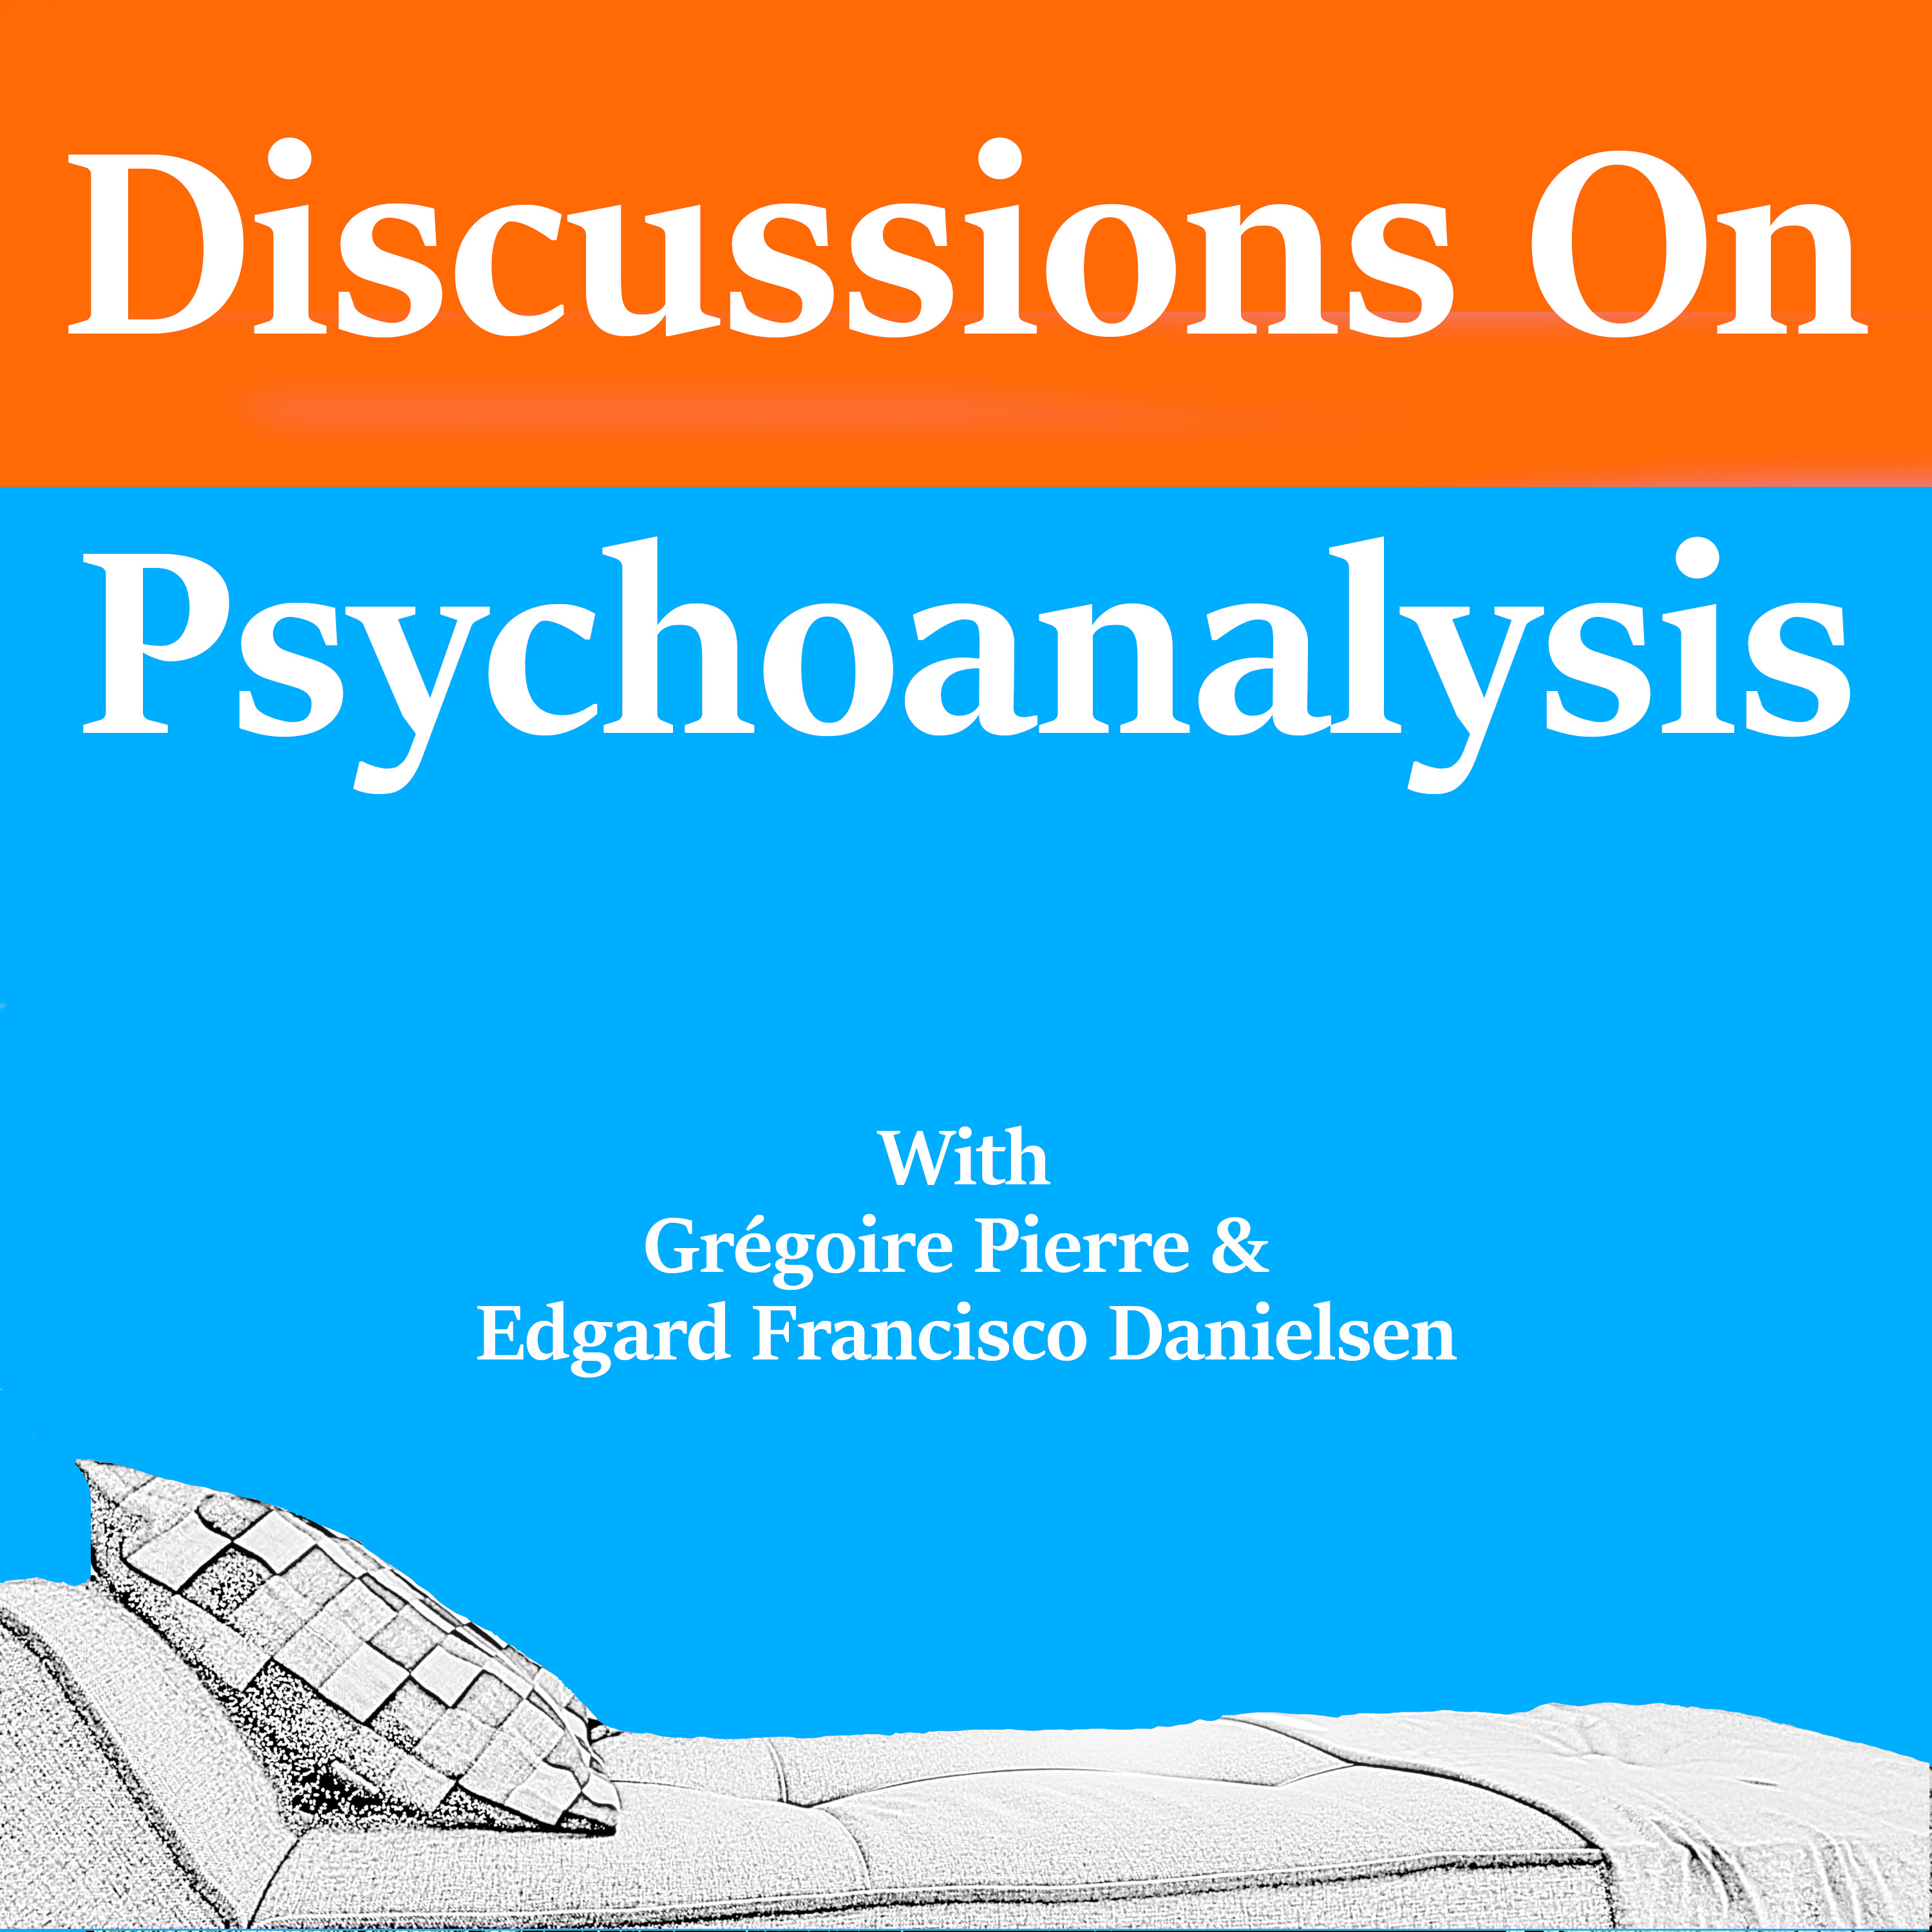 #50 On Using Psychoanalysis in an Institution